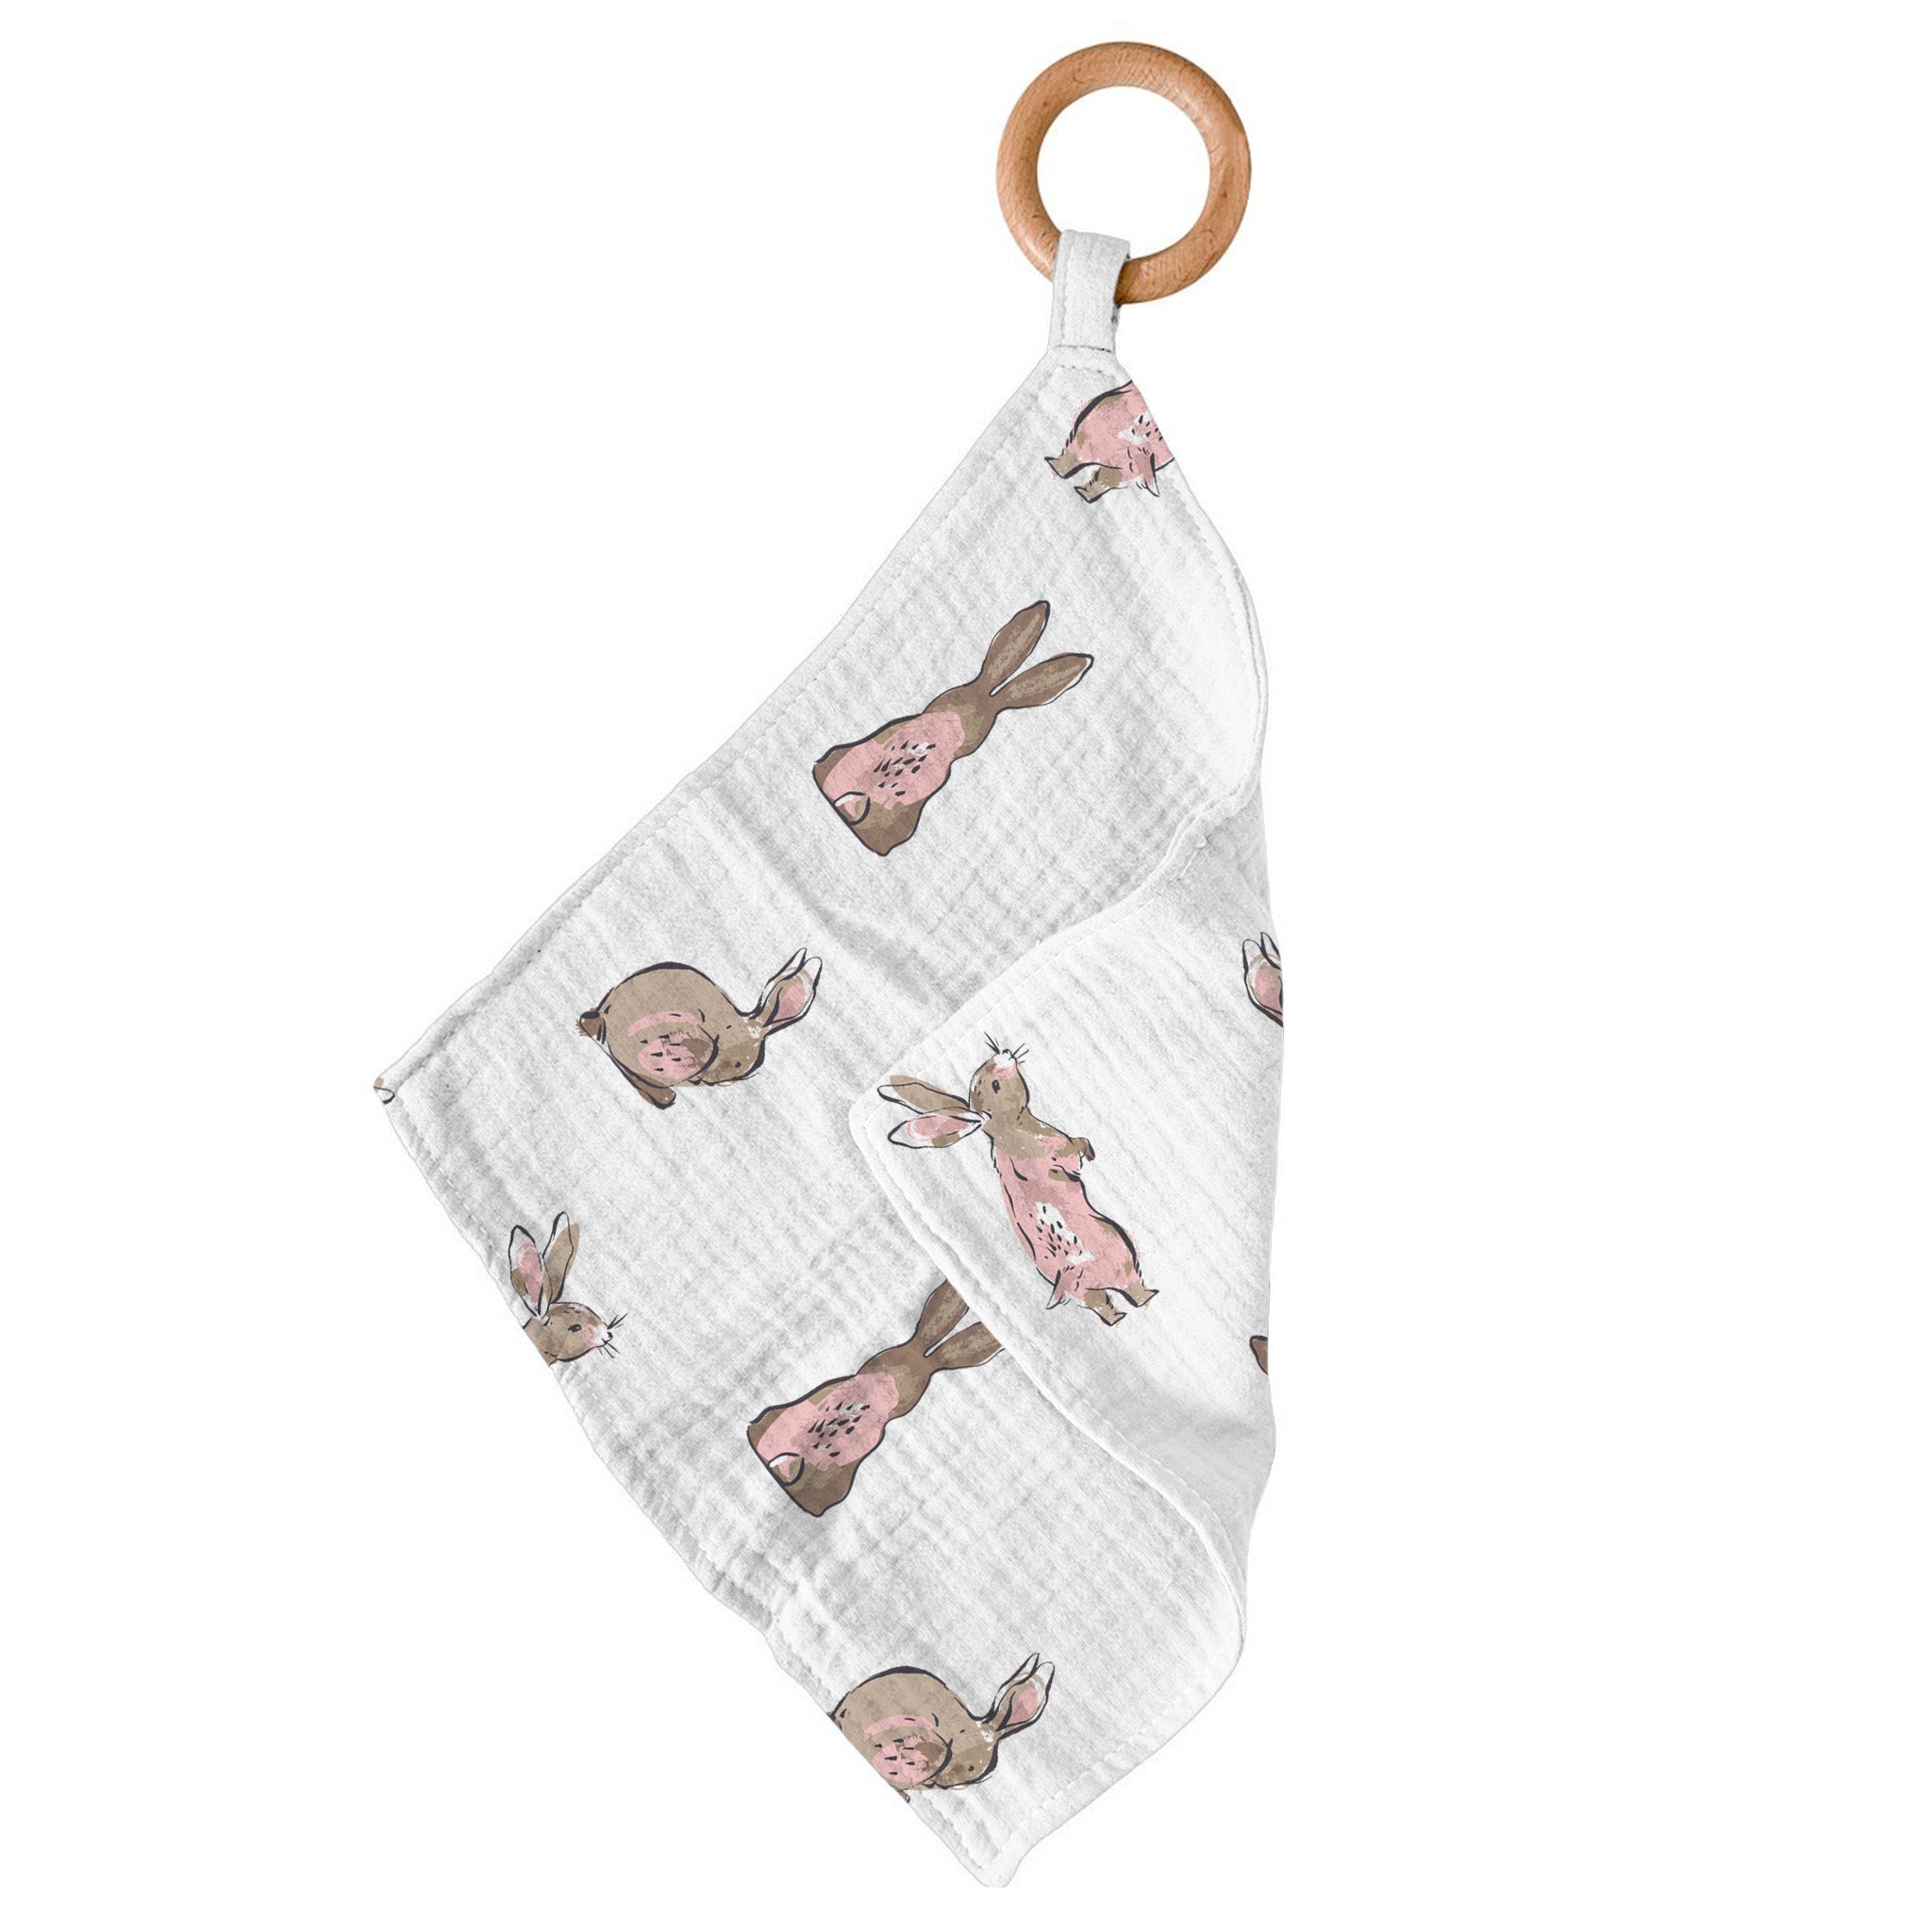 Teether for babies with cute bunny